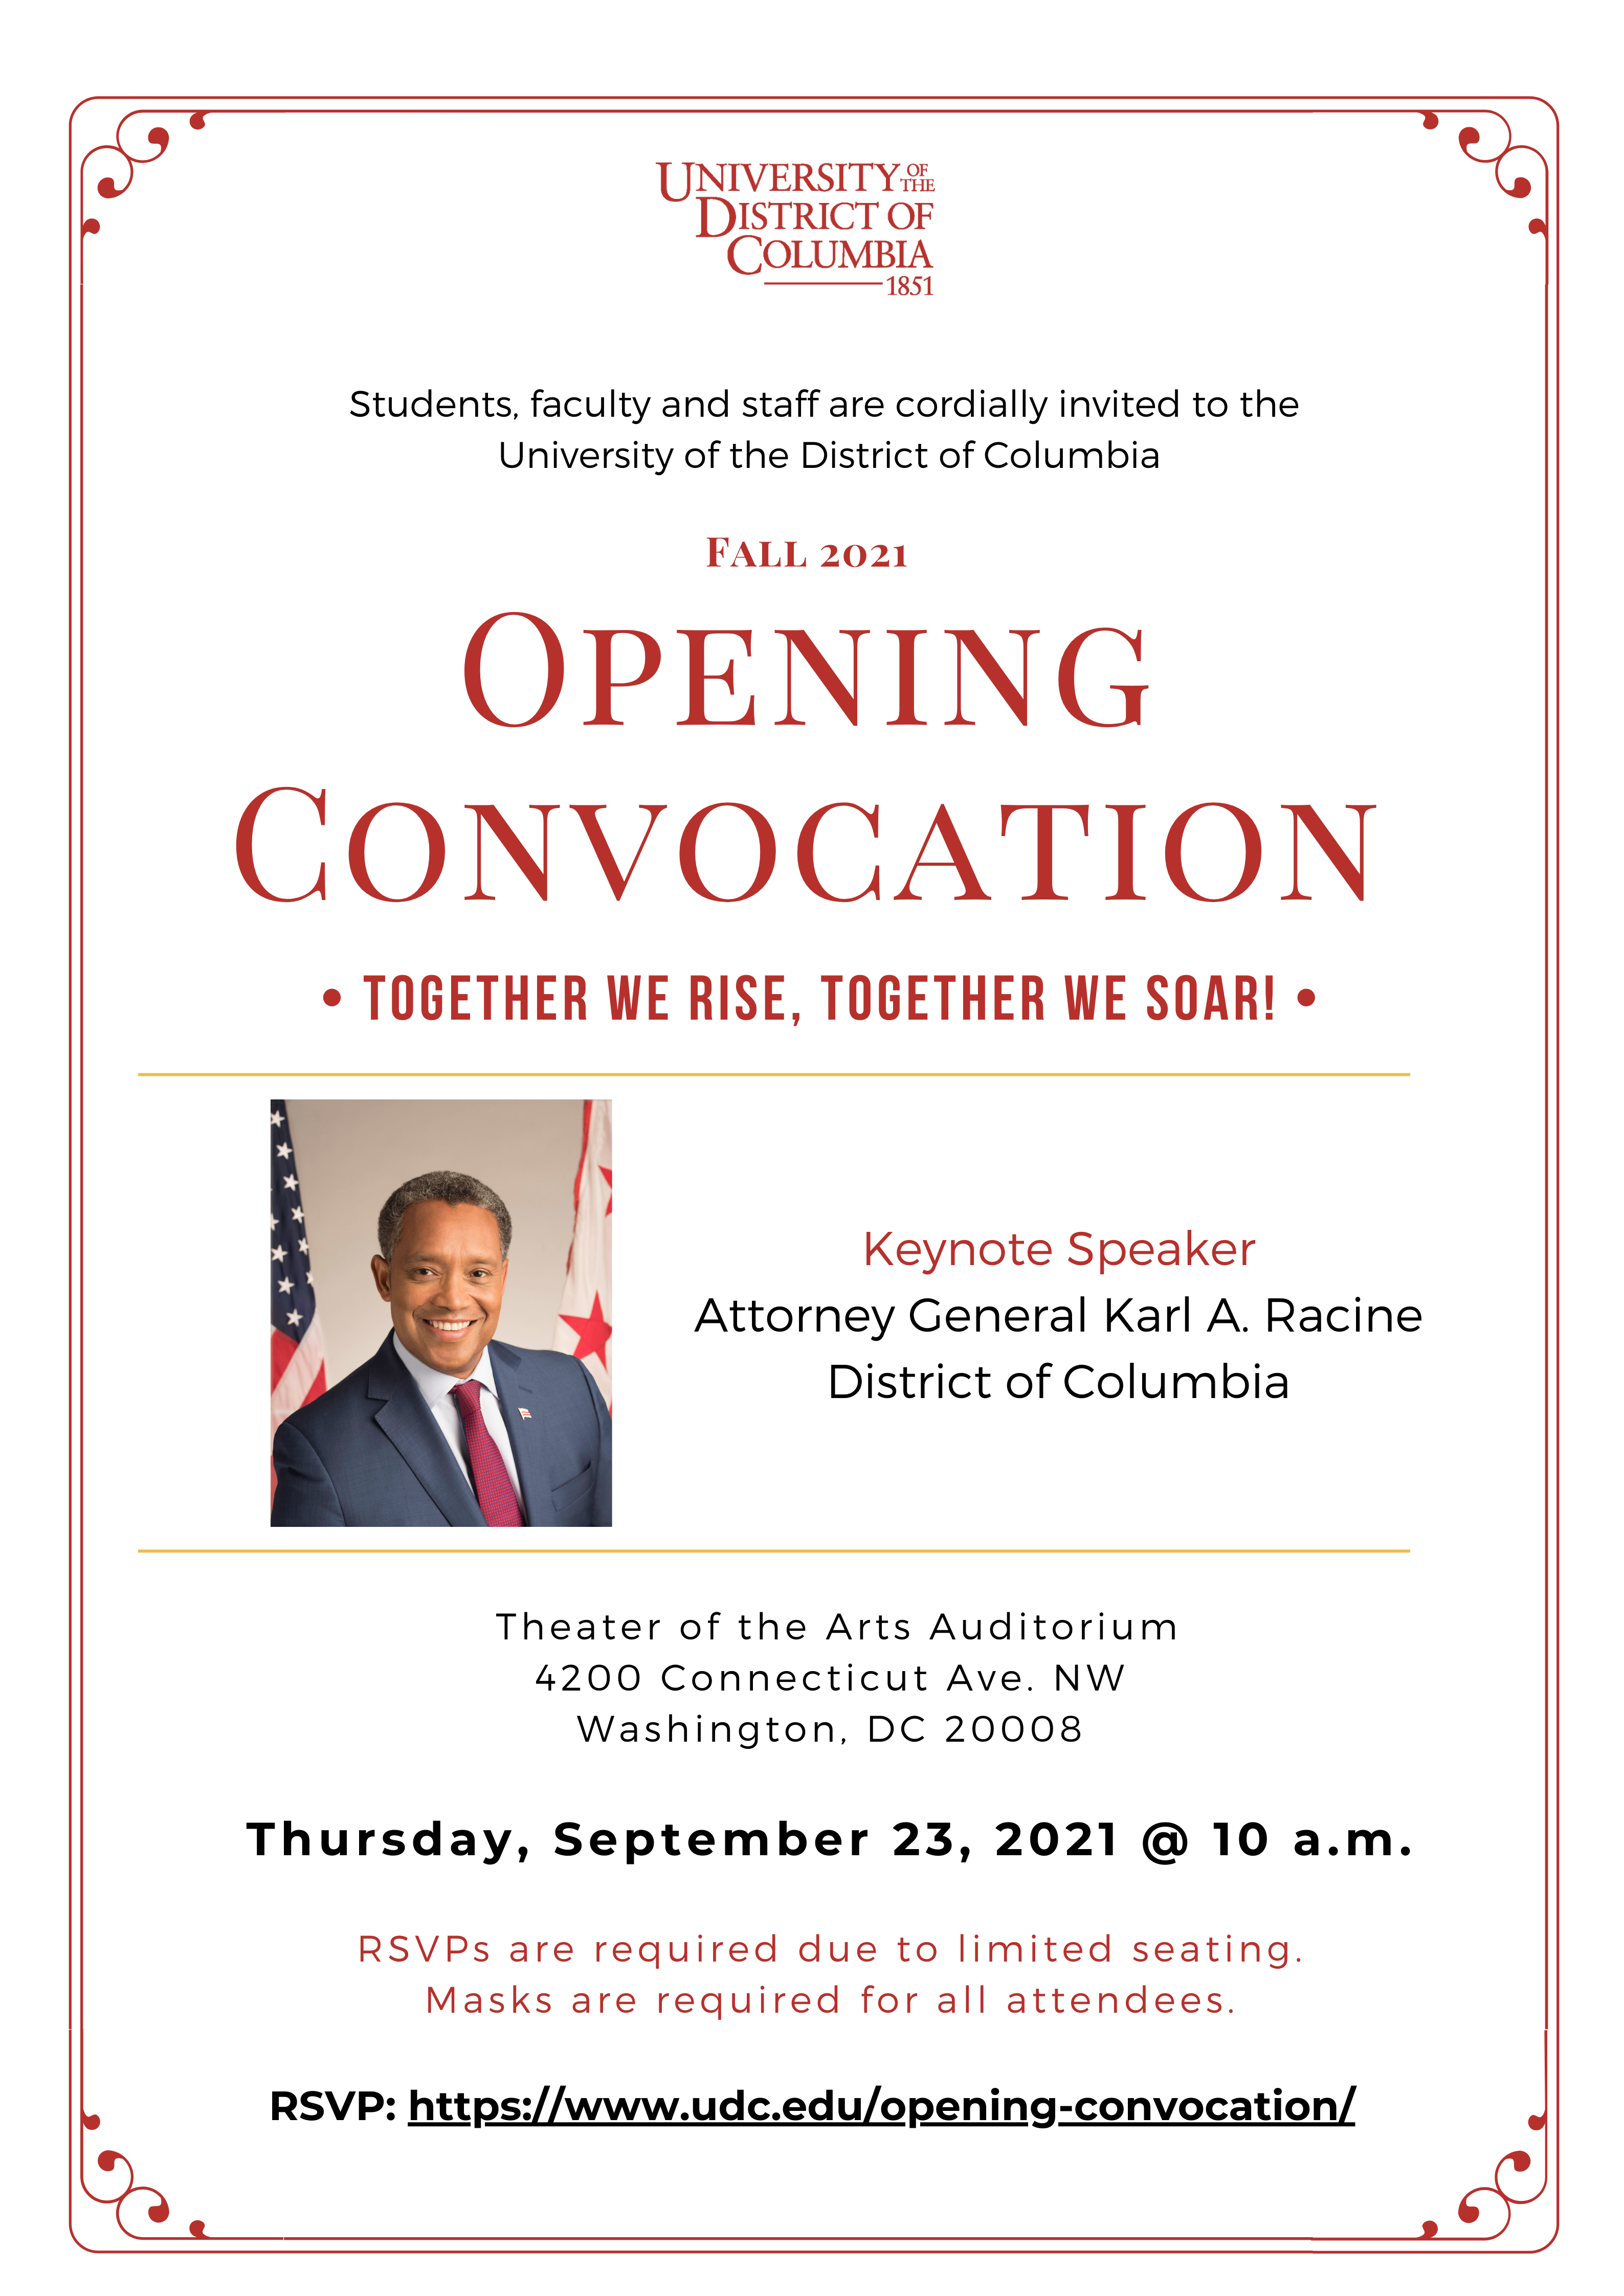 Fall 2021 Opening Convocation September 23, 2020 | 10 a.m.